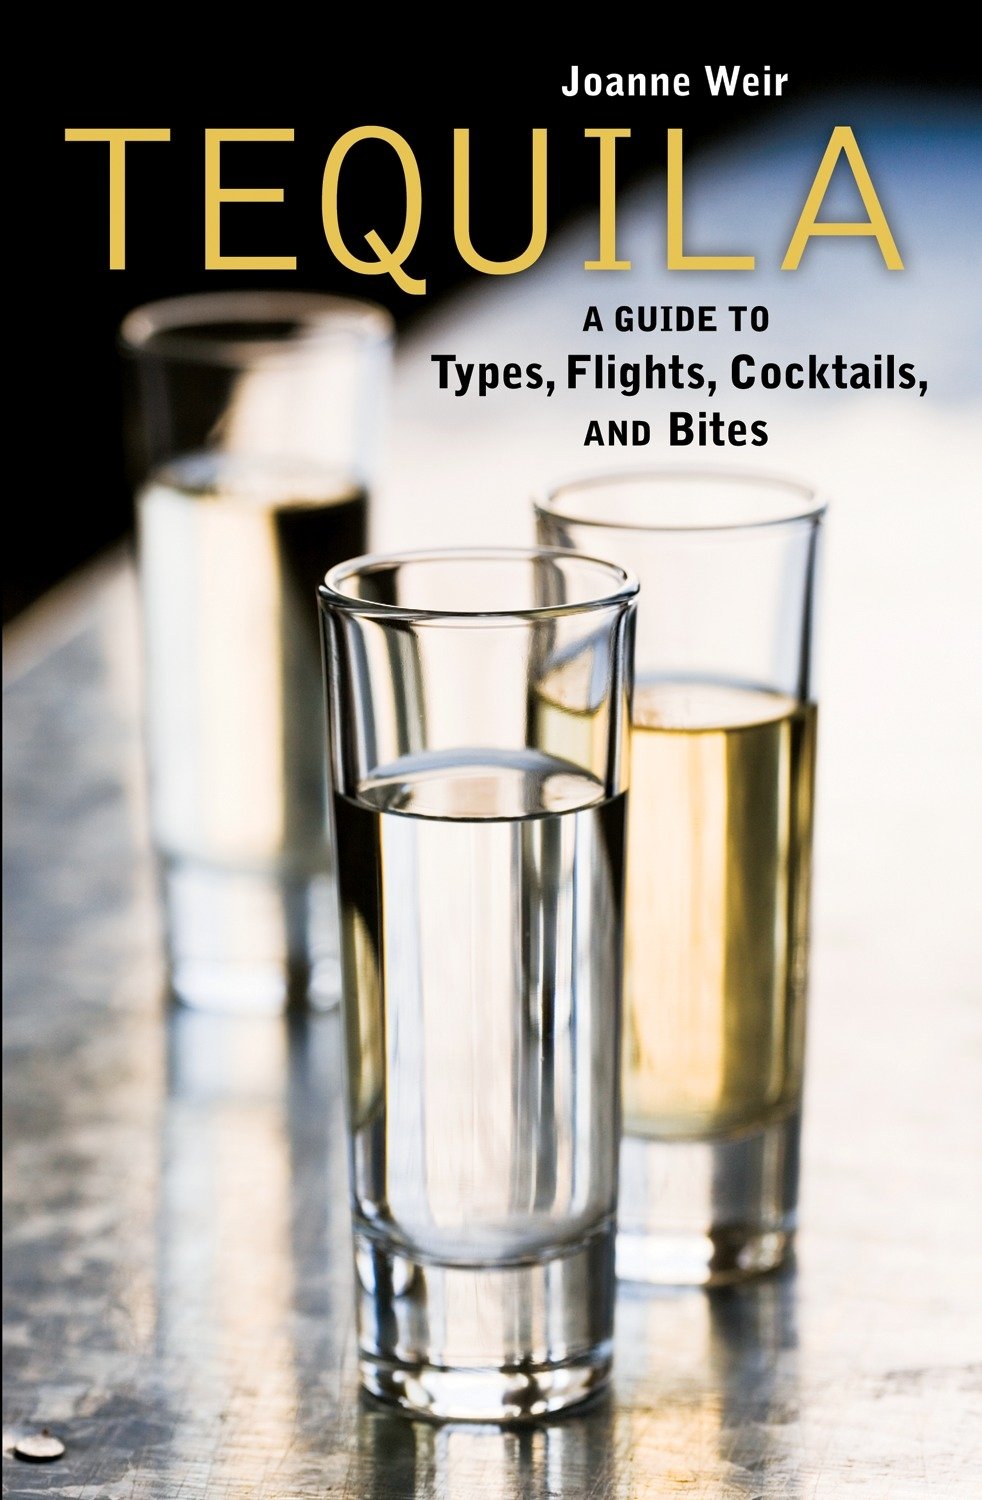 Tequila: A Guide to Types, Flights, Cocktails, and Bites (Joanne Weir)